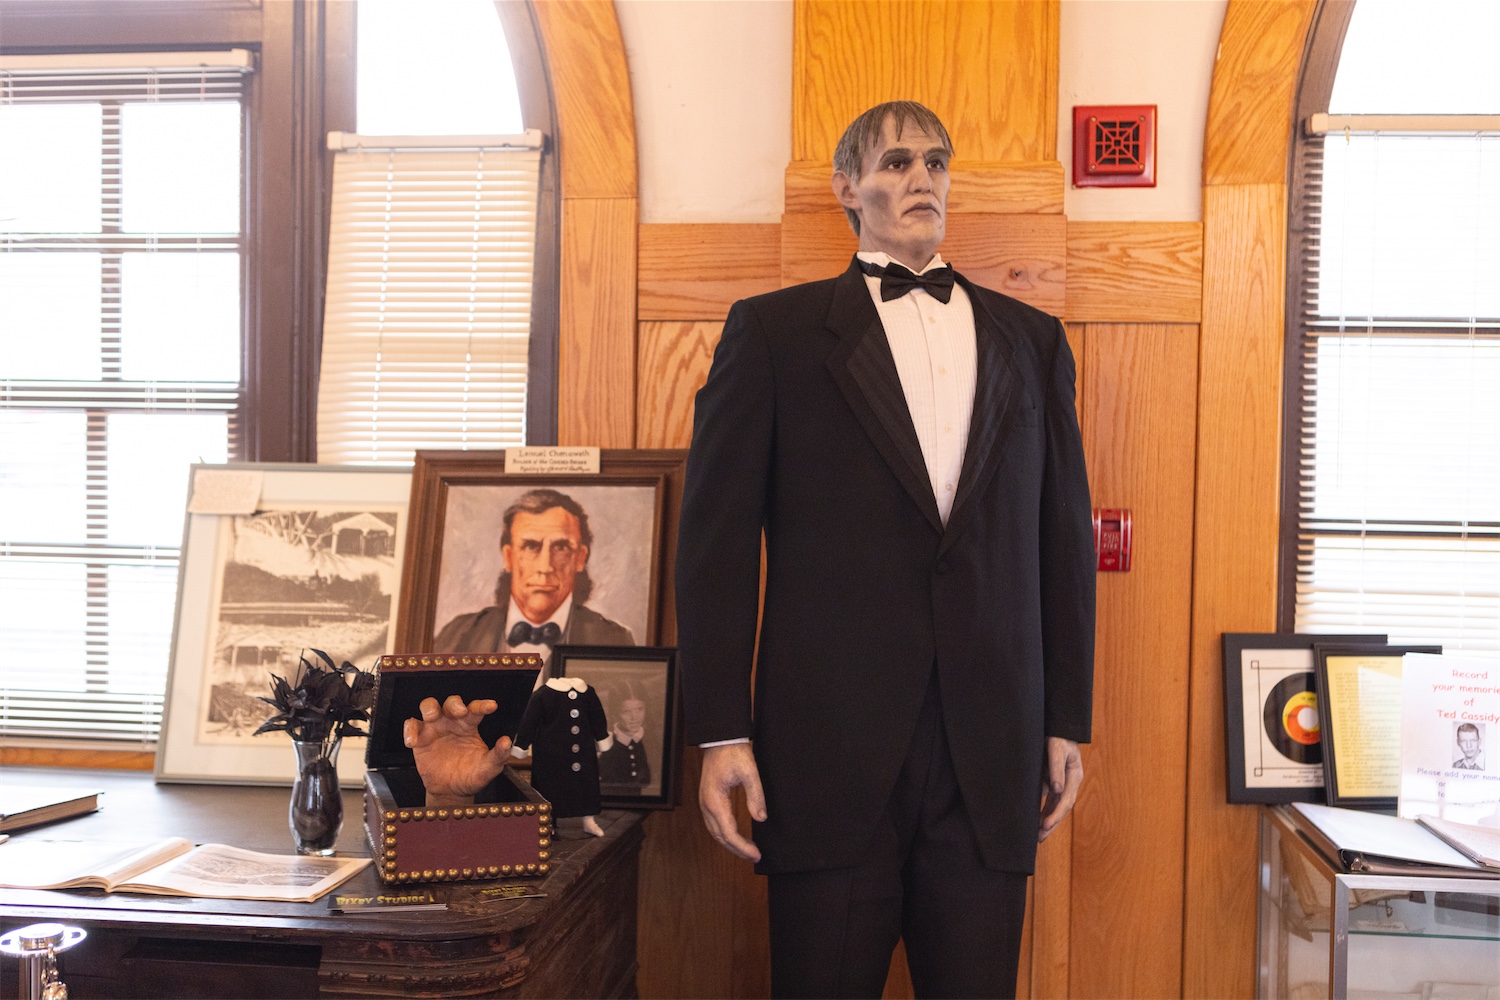 A life-sized statue of Lurch from the Addams Family